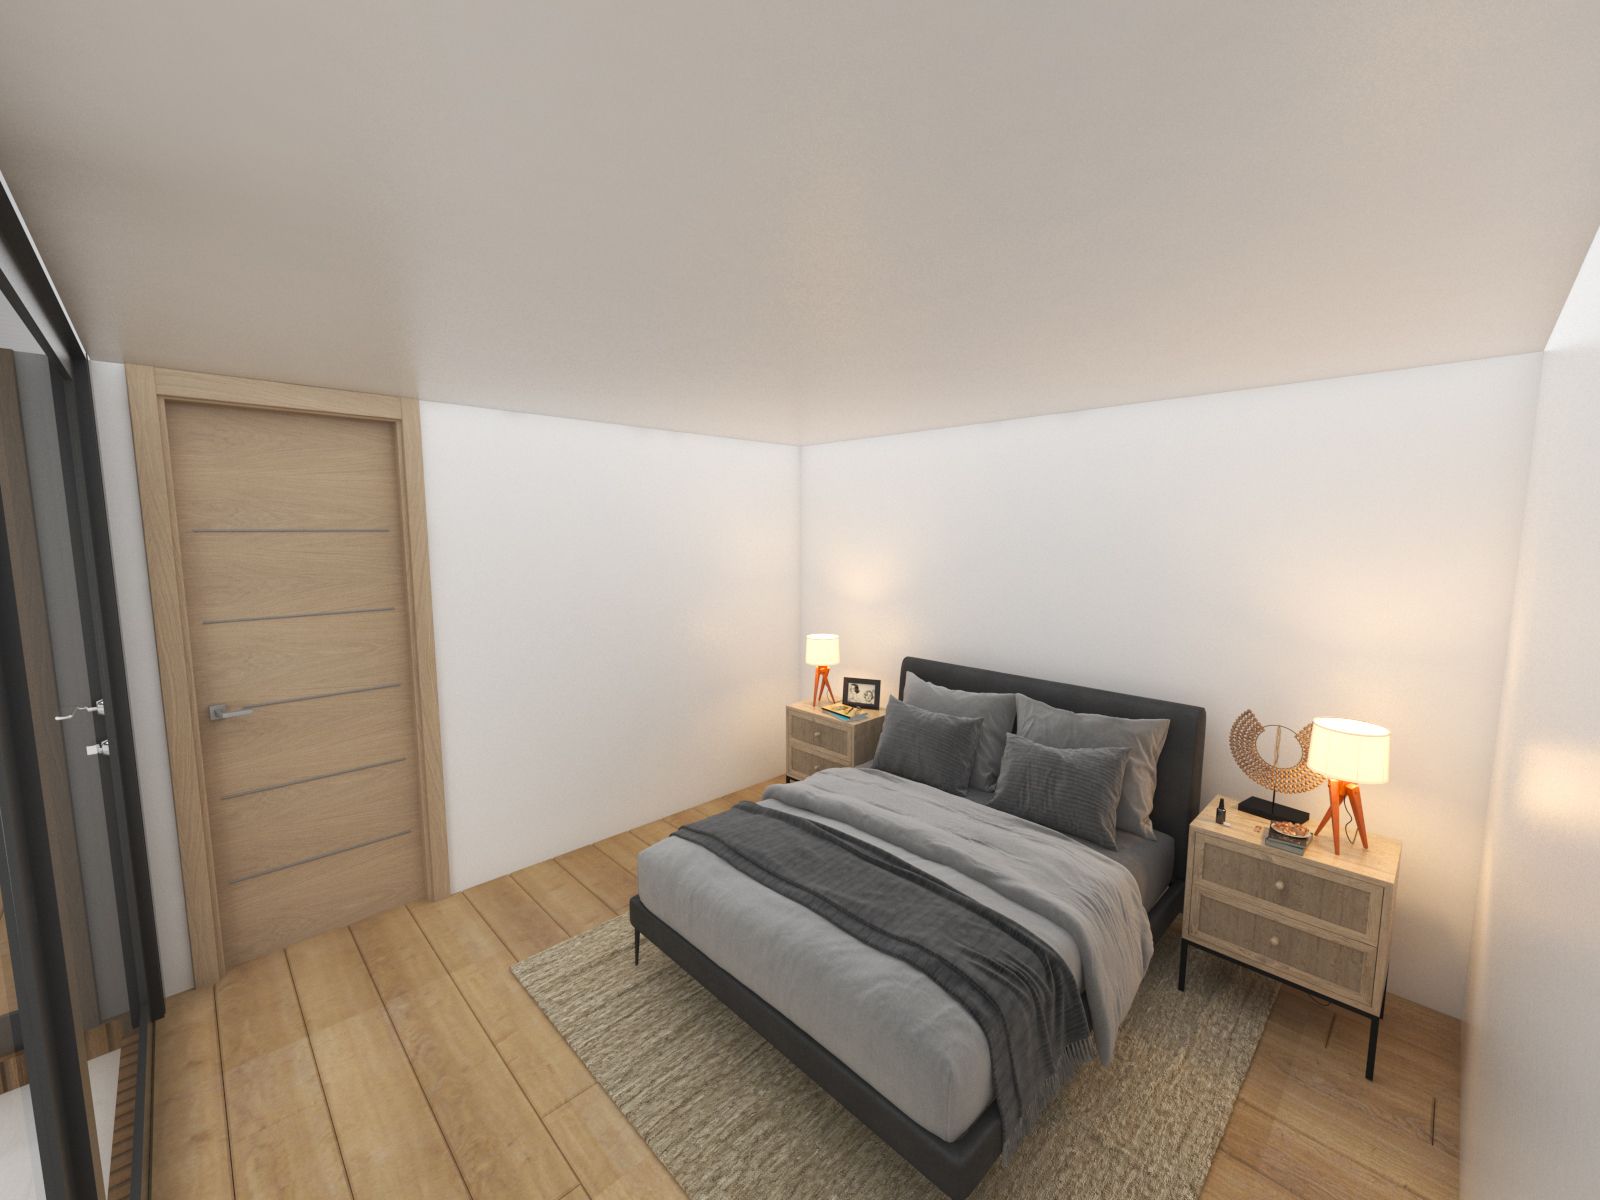 a bedroom with a large bed and two nightstands as part of a corner garden room plan